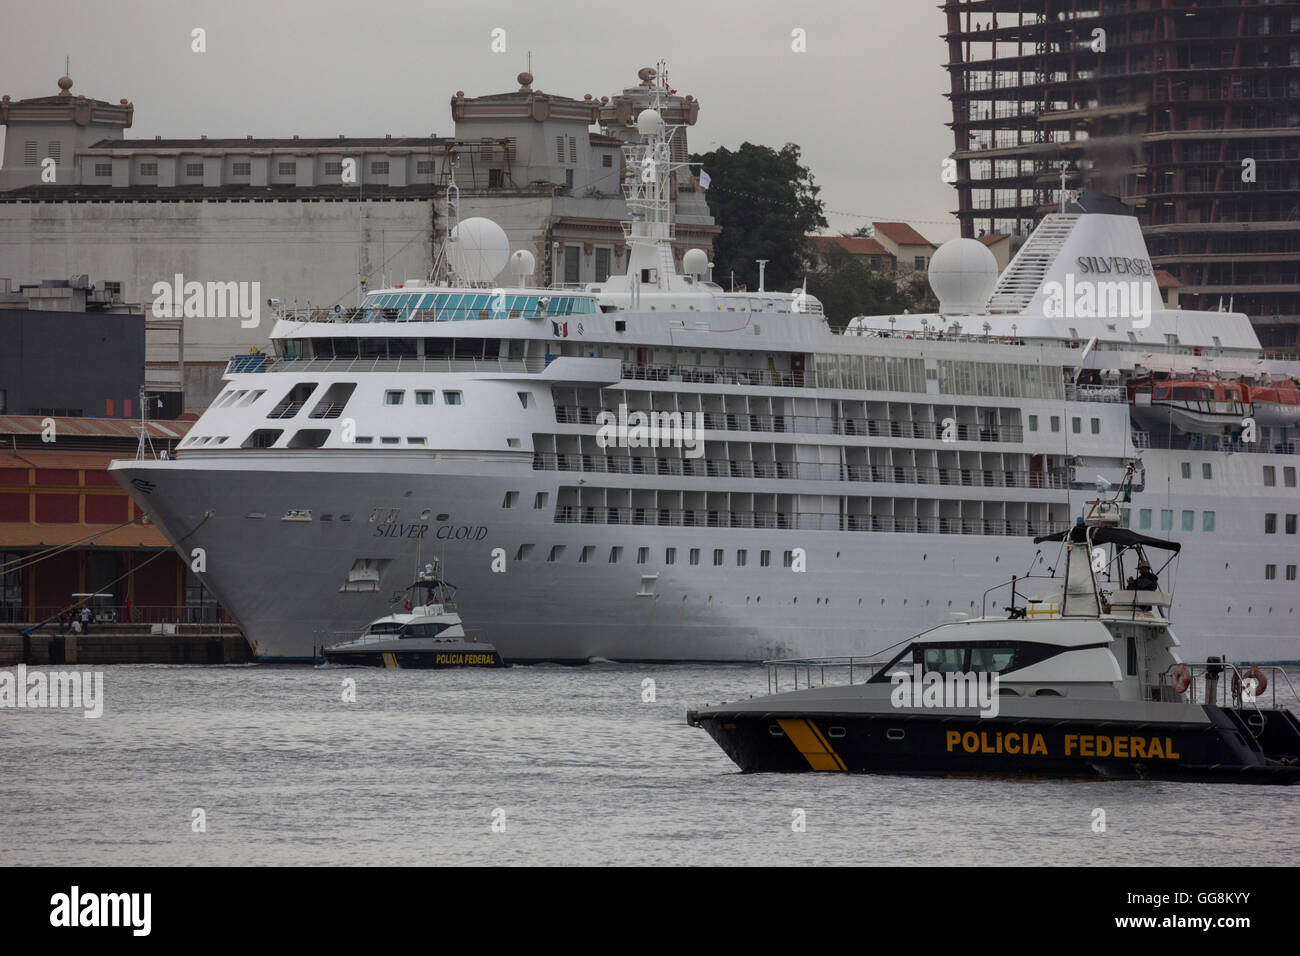 RIO DE JANEIRO, RJ - 03.08.2016: NAVIO SILVER CLOUD HOSPEDA ASTROS DA NBA - View of the ship Silver Cloud, which is moored at Pier Maua, the Port of Rio, near the Olympic Boulevard. The ship will be used for the hosting of US basketball athletes and guests. The Port of Rio will also be used as lodging for other ships and luxury yachts. Boats Federal Police ensure safety in the port area, ensuring the privacy of athletes. (Photo: Luiz Souza/Fotoarena) Stock Photo